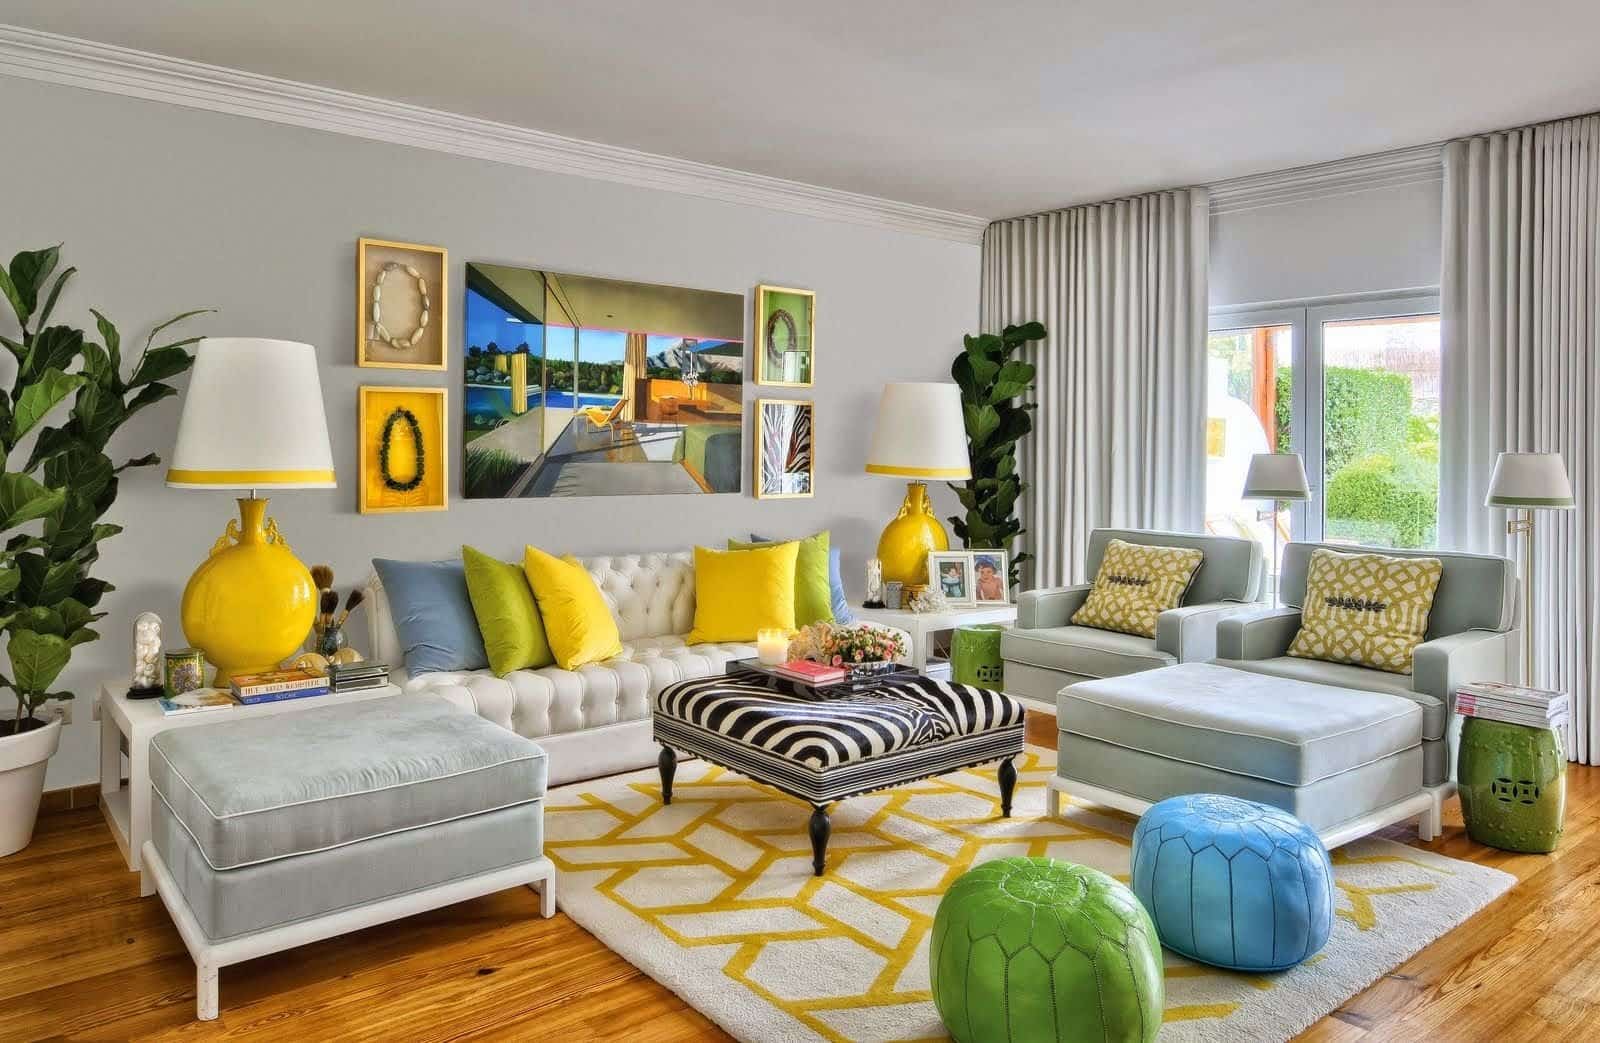 Multicolored living room with yellow, green, blue accents